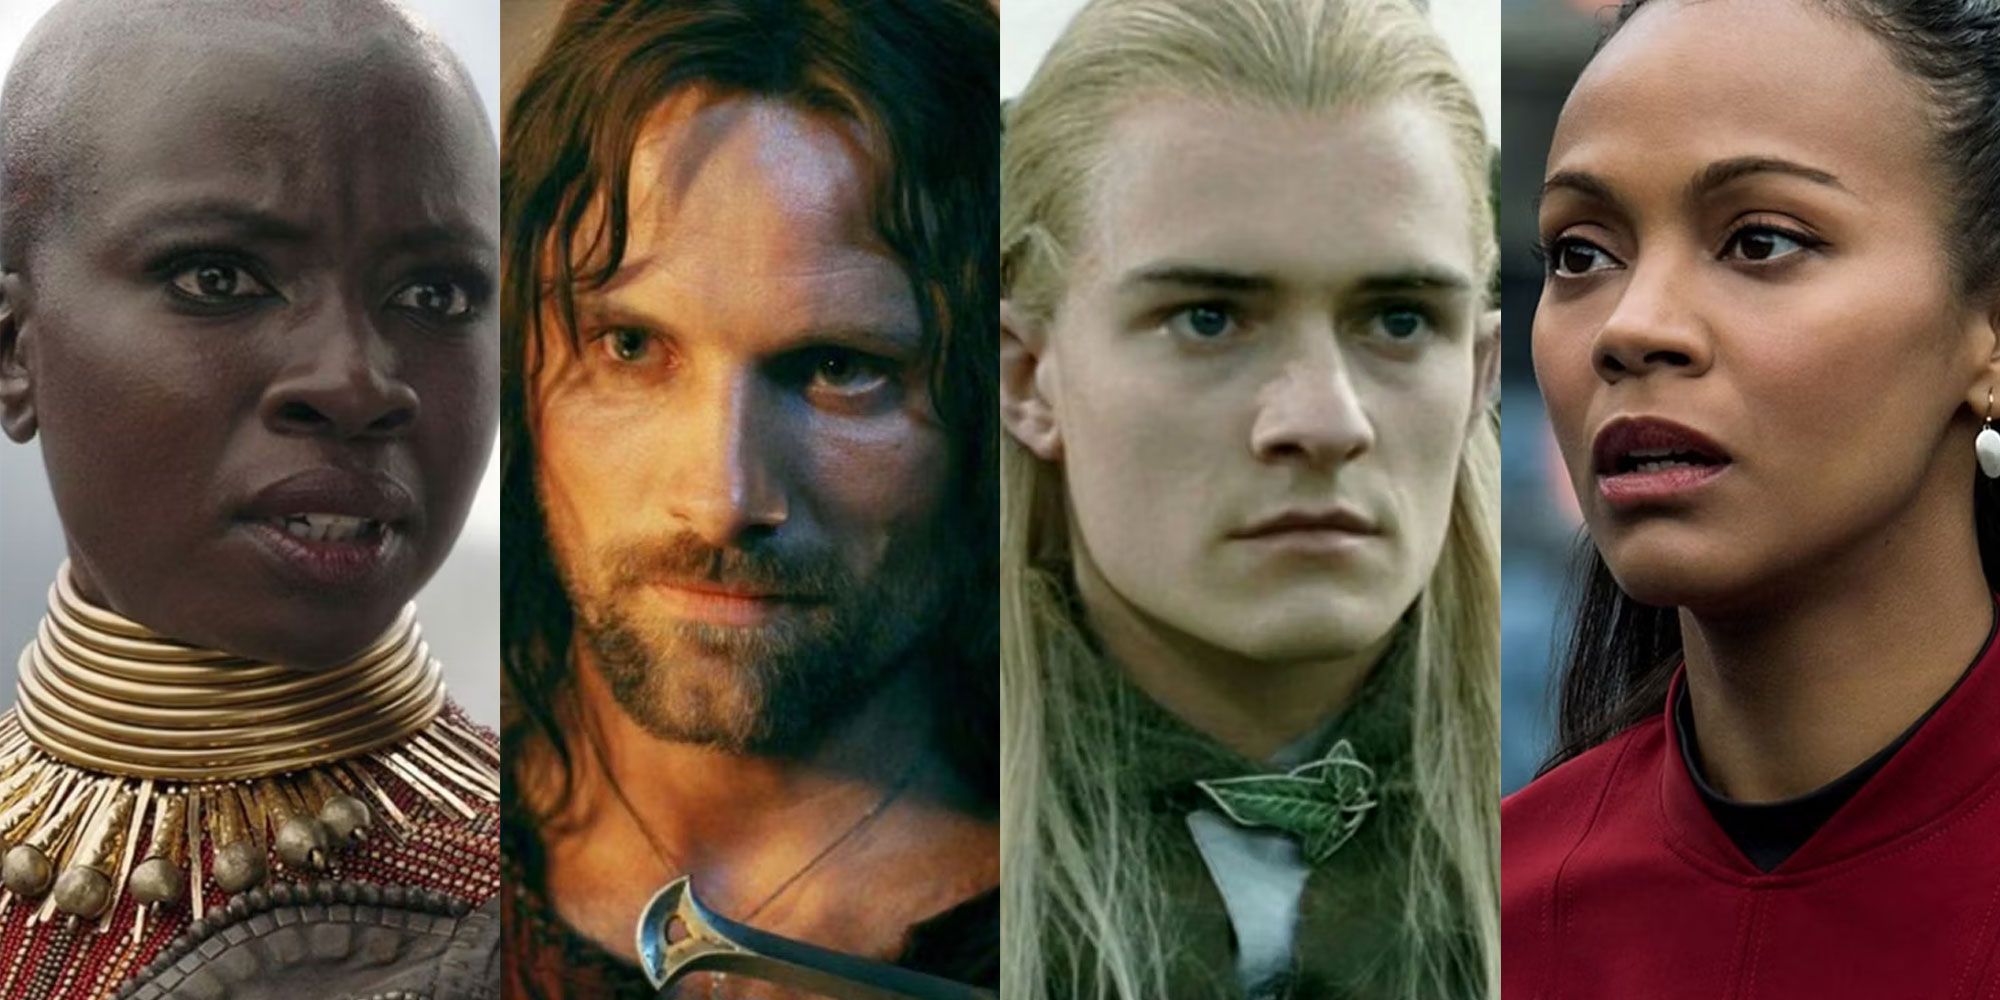 Split image of Aragorn and Legolas from Lord of the Rings with female casting counterparts